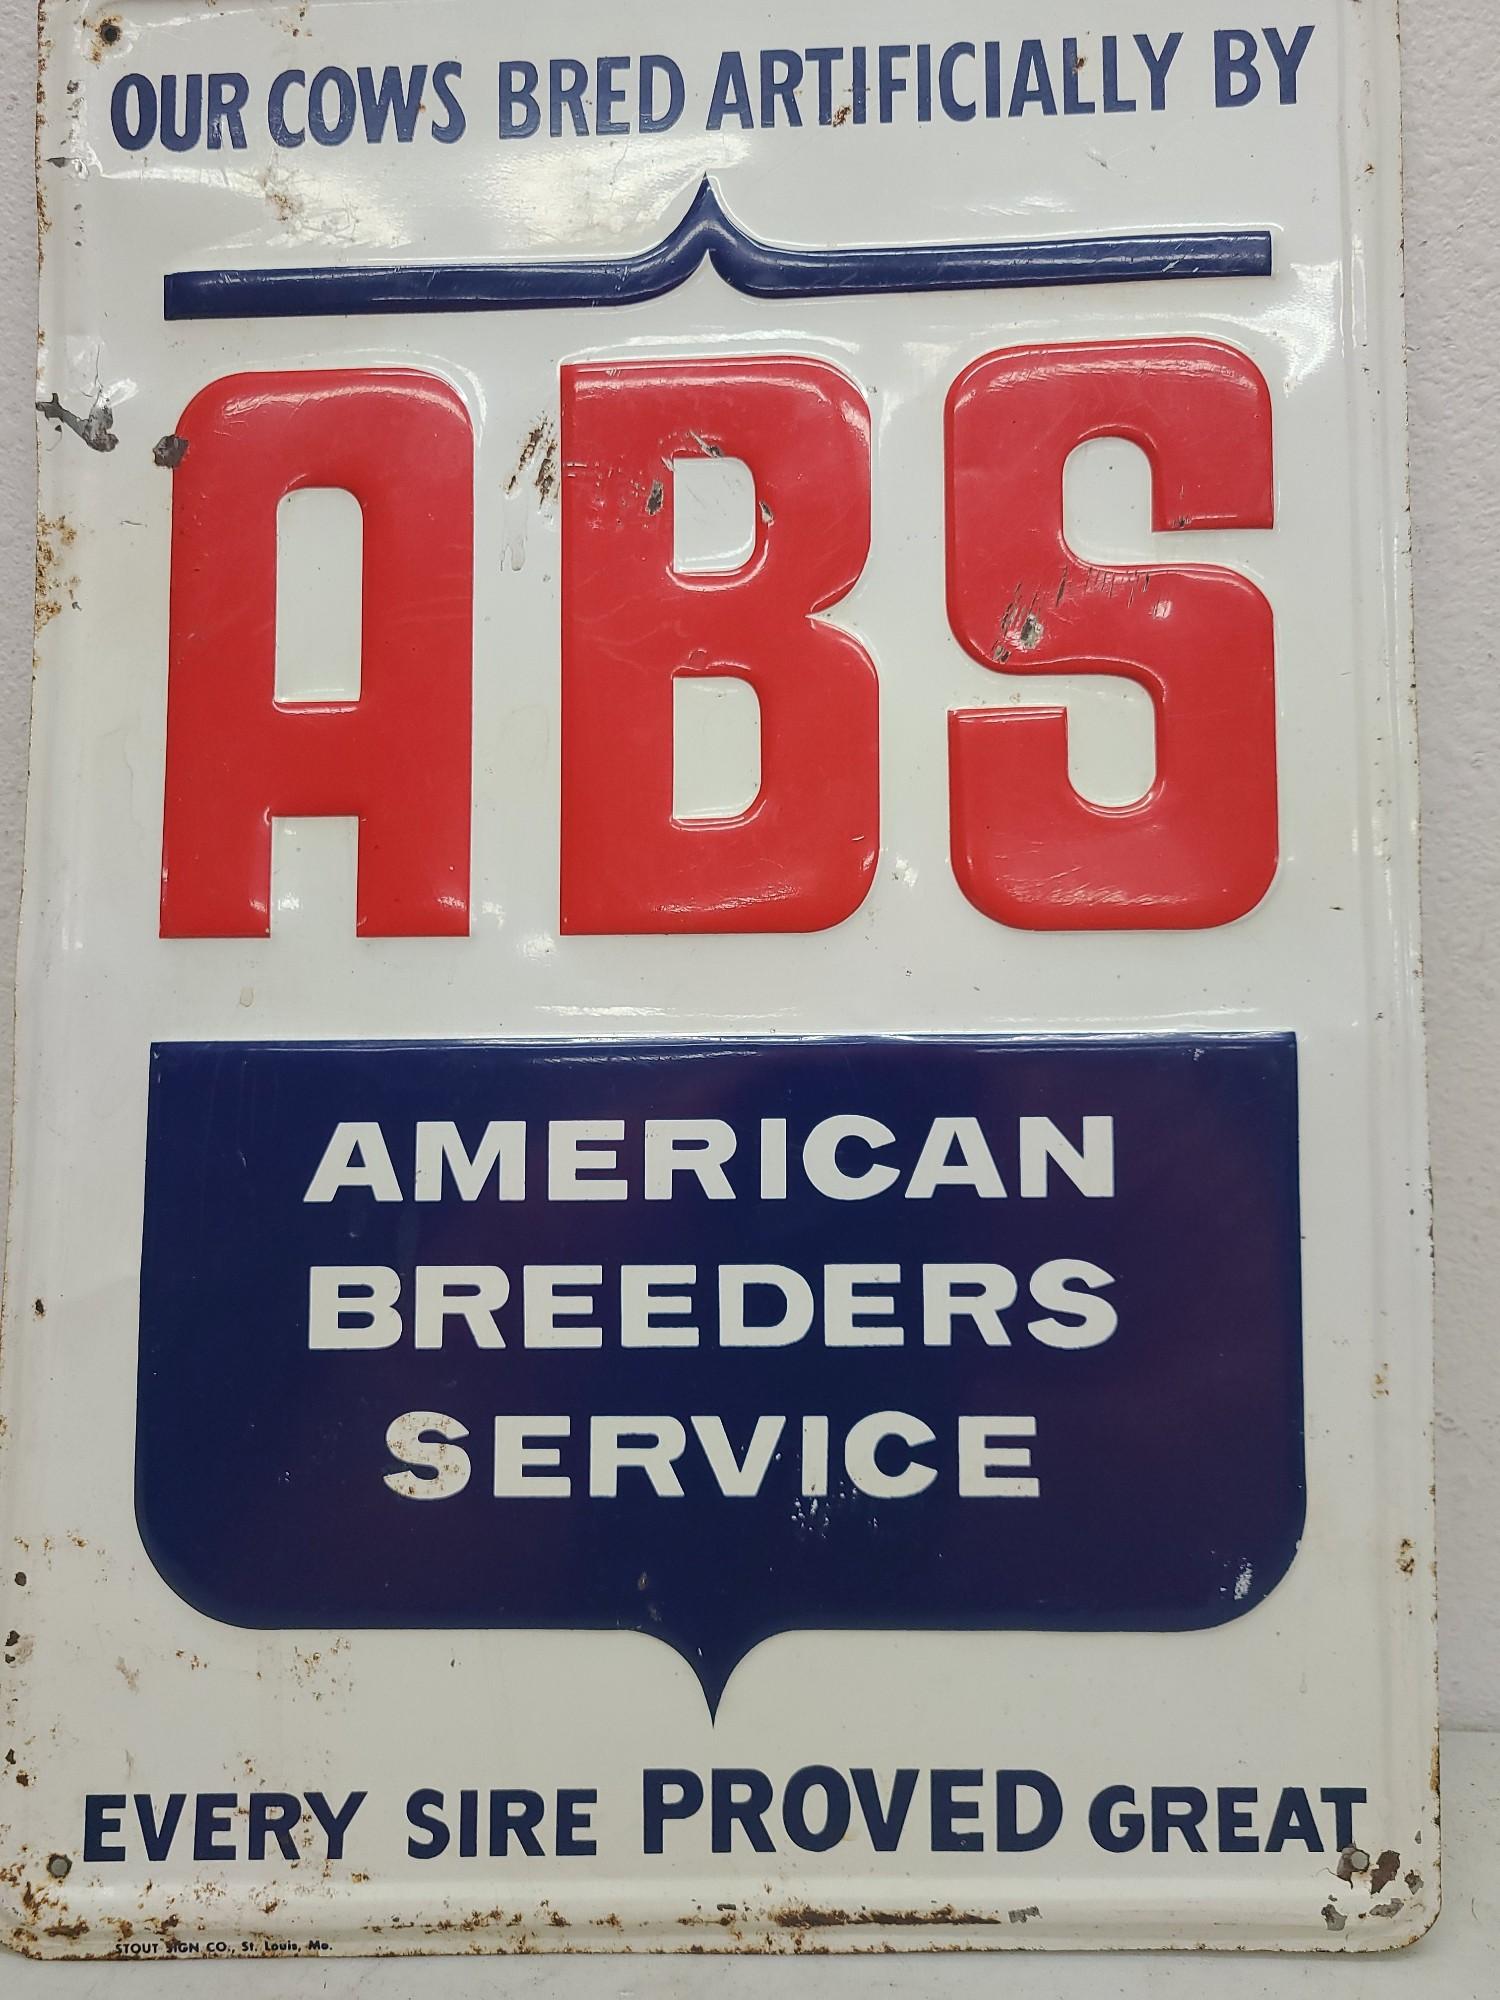 SST Embossed  ABS Sign